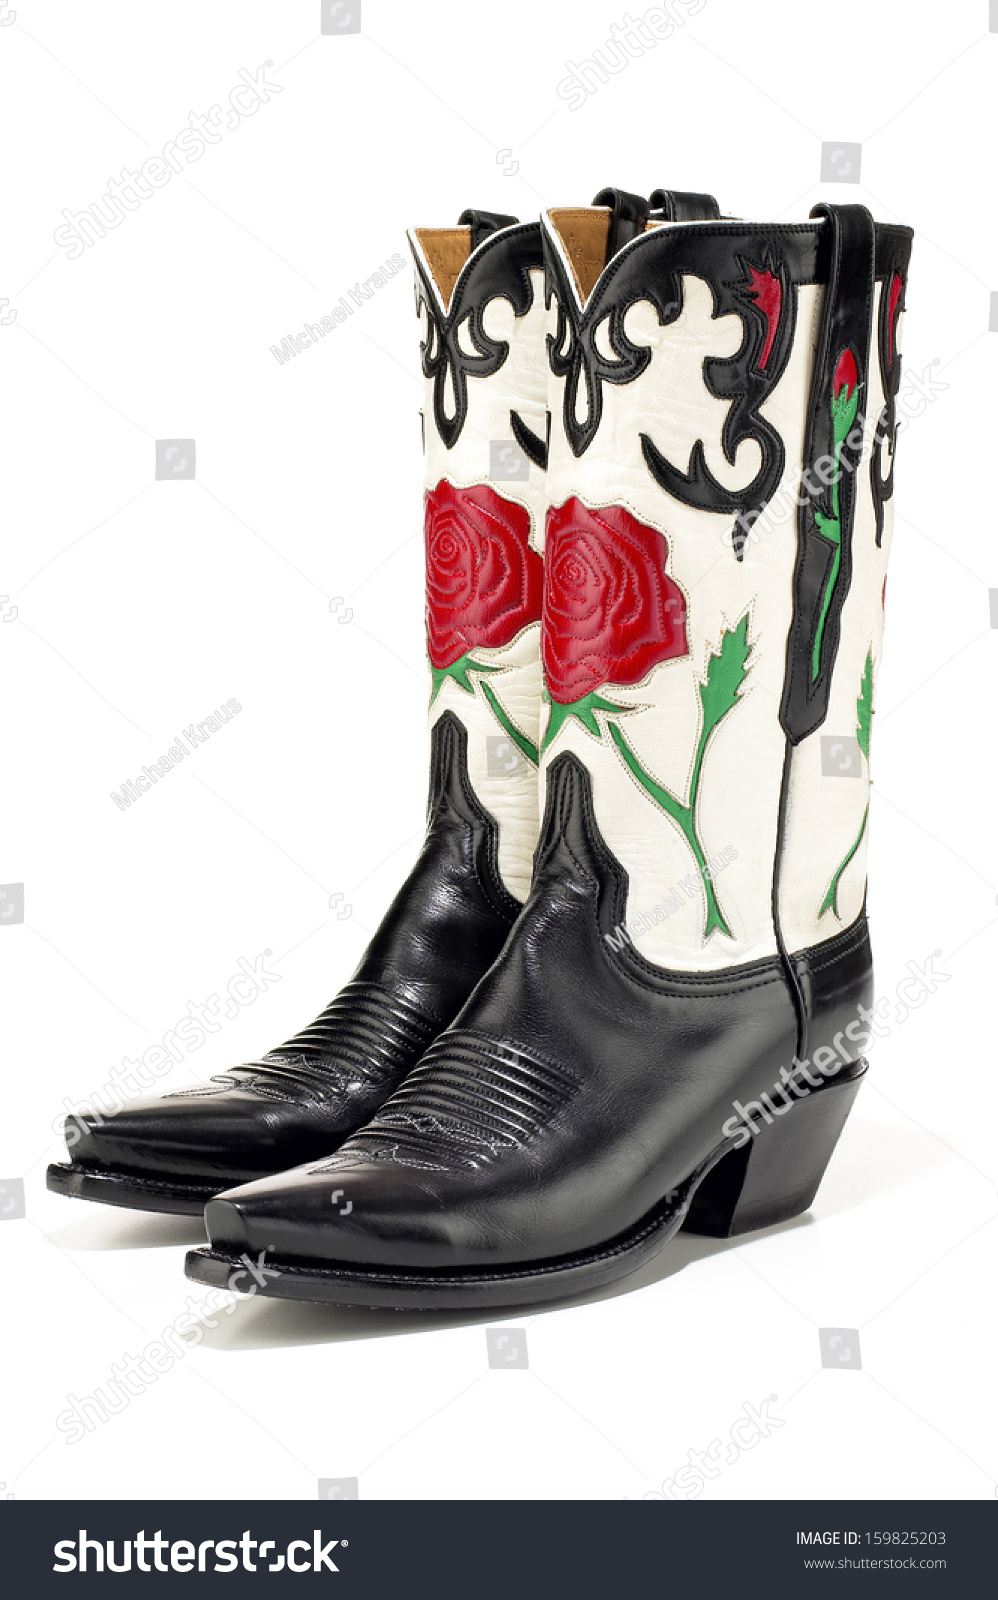 red rose cowboy boots